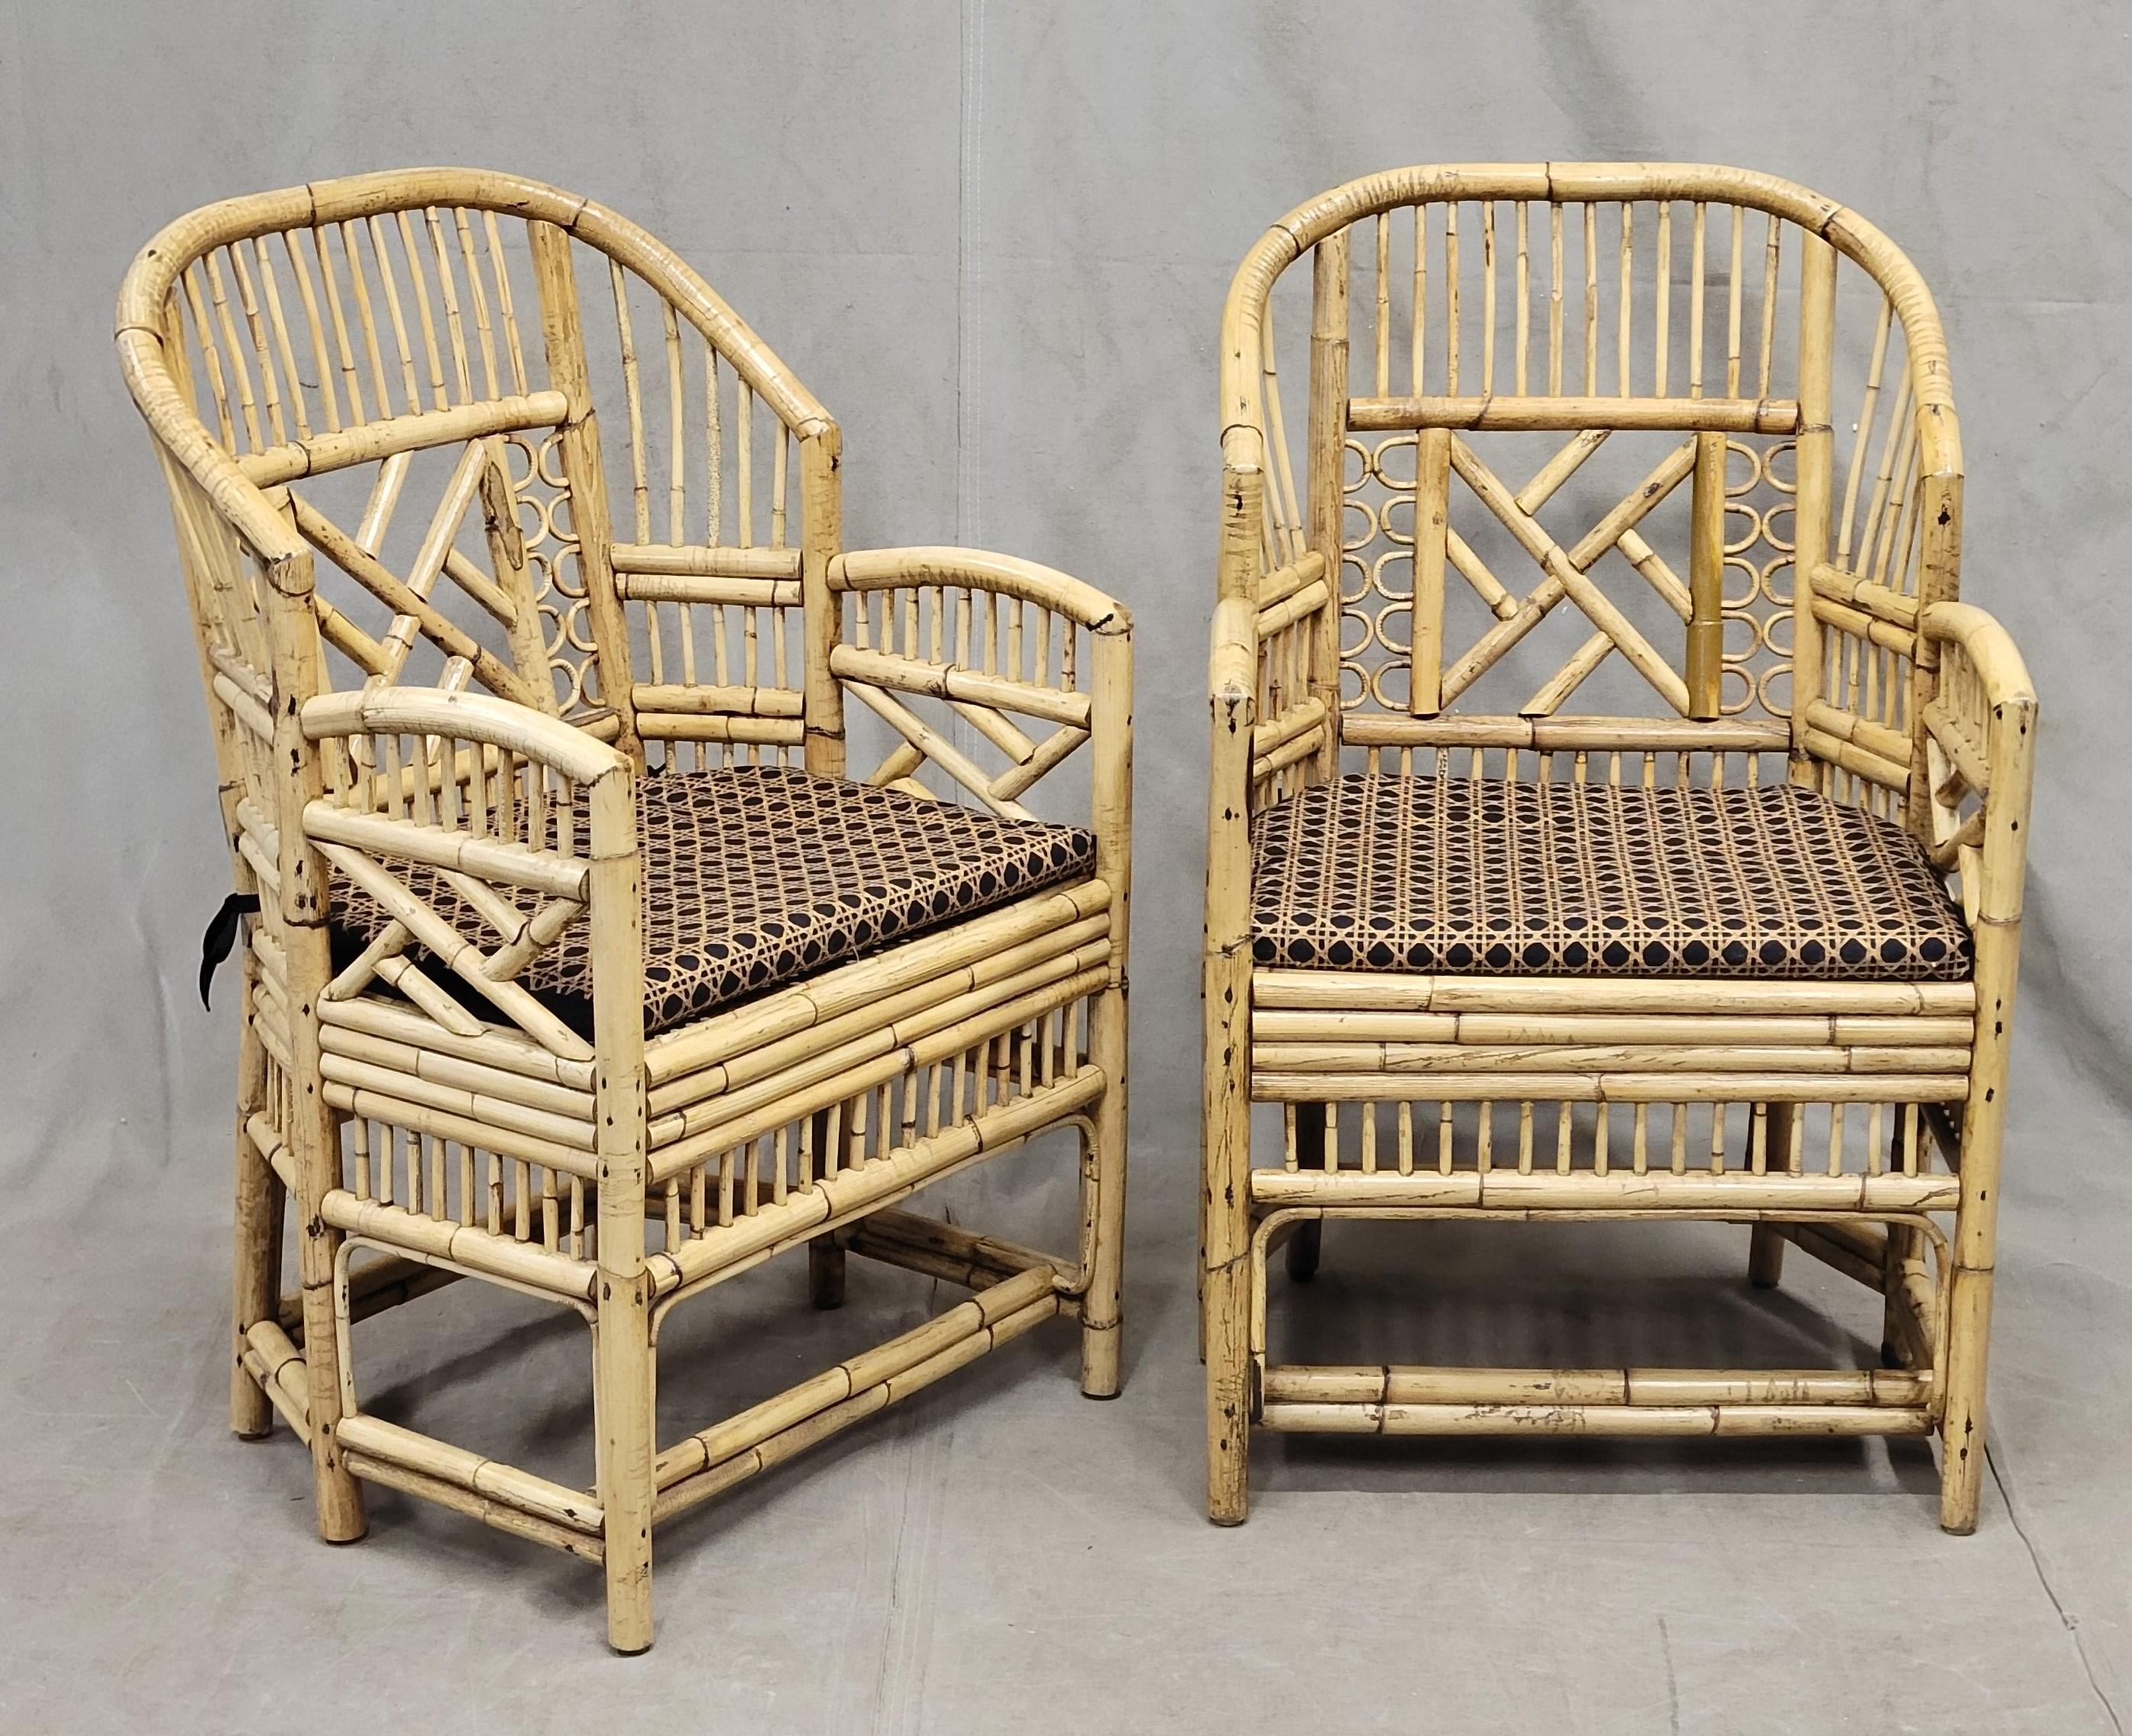 Chinese Chippendale Vintage Brighton Pavilion Faux Bamboo Chairs With Kravet Cushions, Set of 4